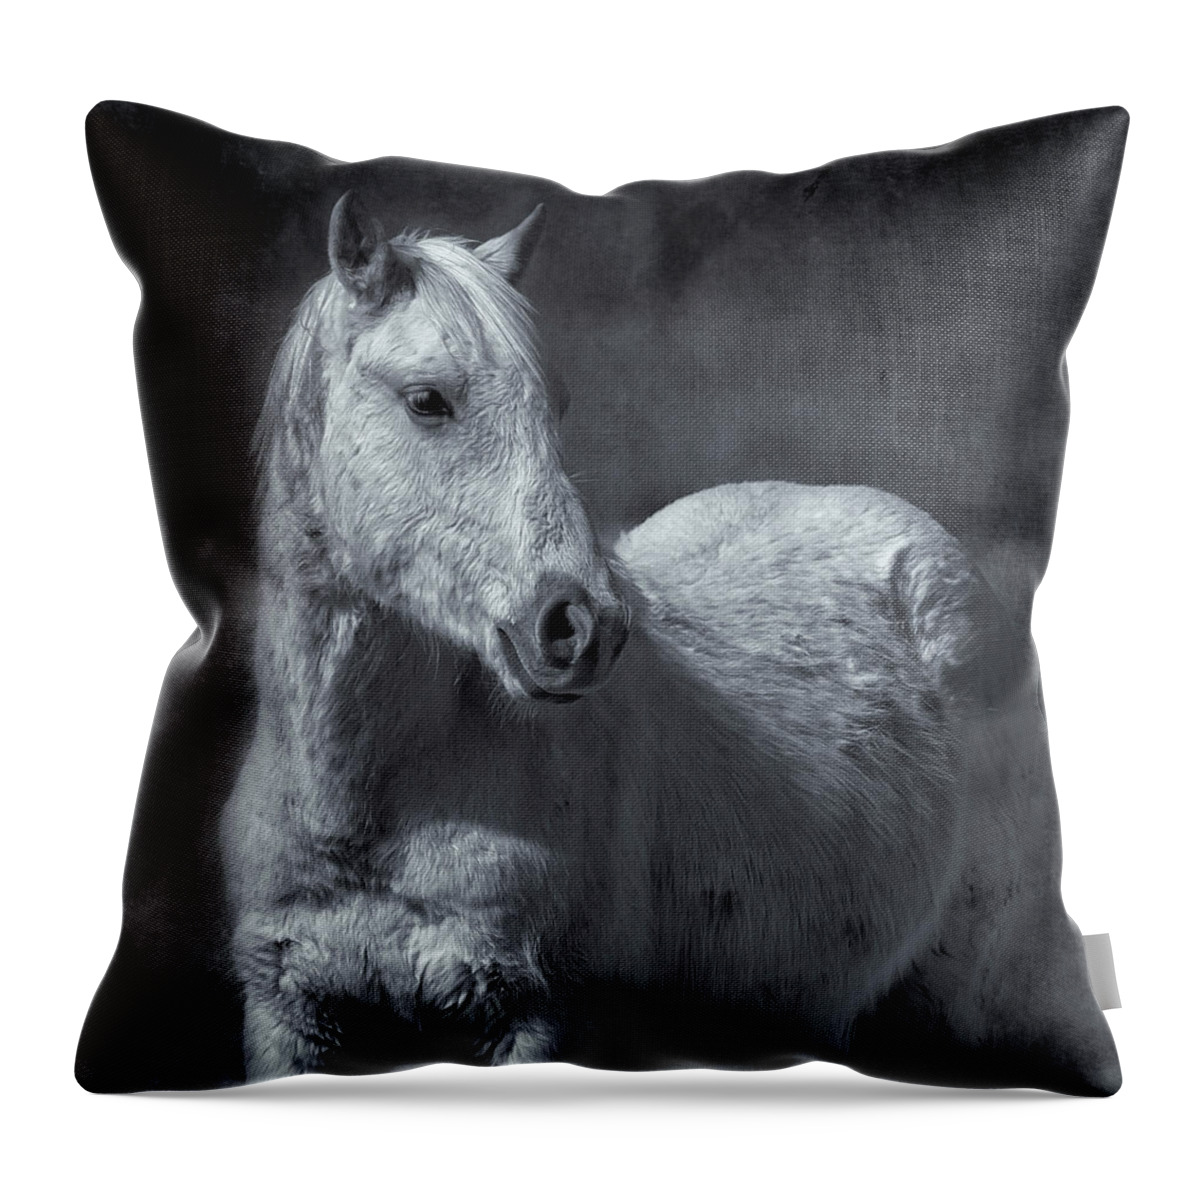 Wild Horses Throw Pillow featuring the photograph Traveler Portrait No 1 BW by Belinda Greb